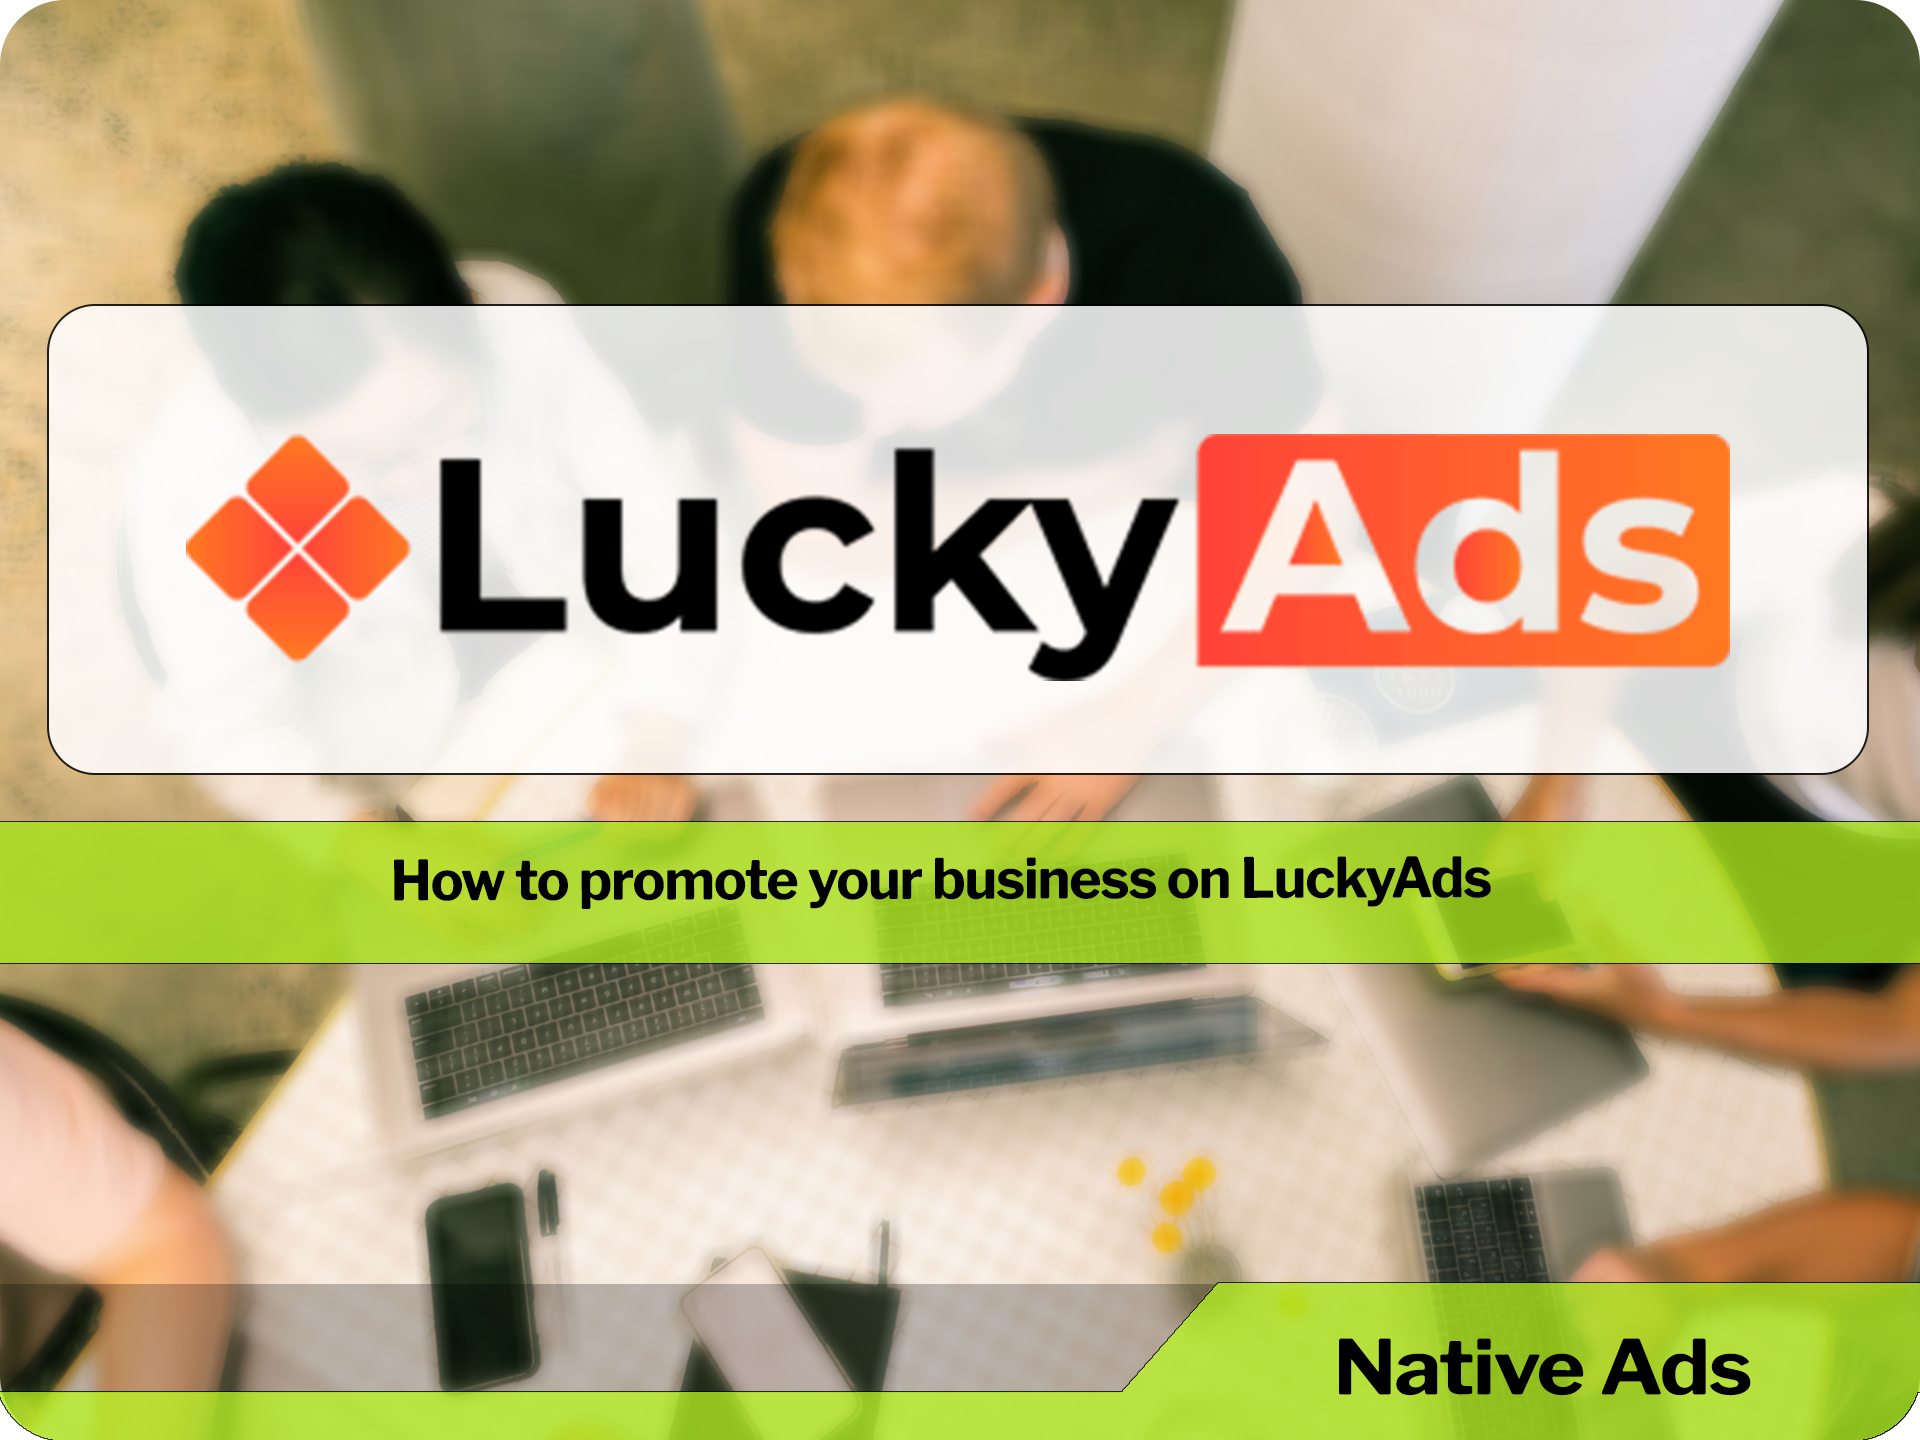 Benefits of working with Lucky Ads